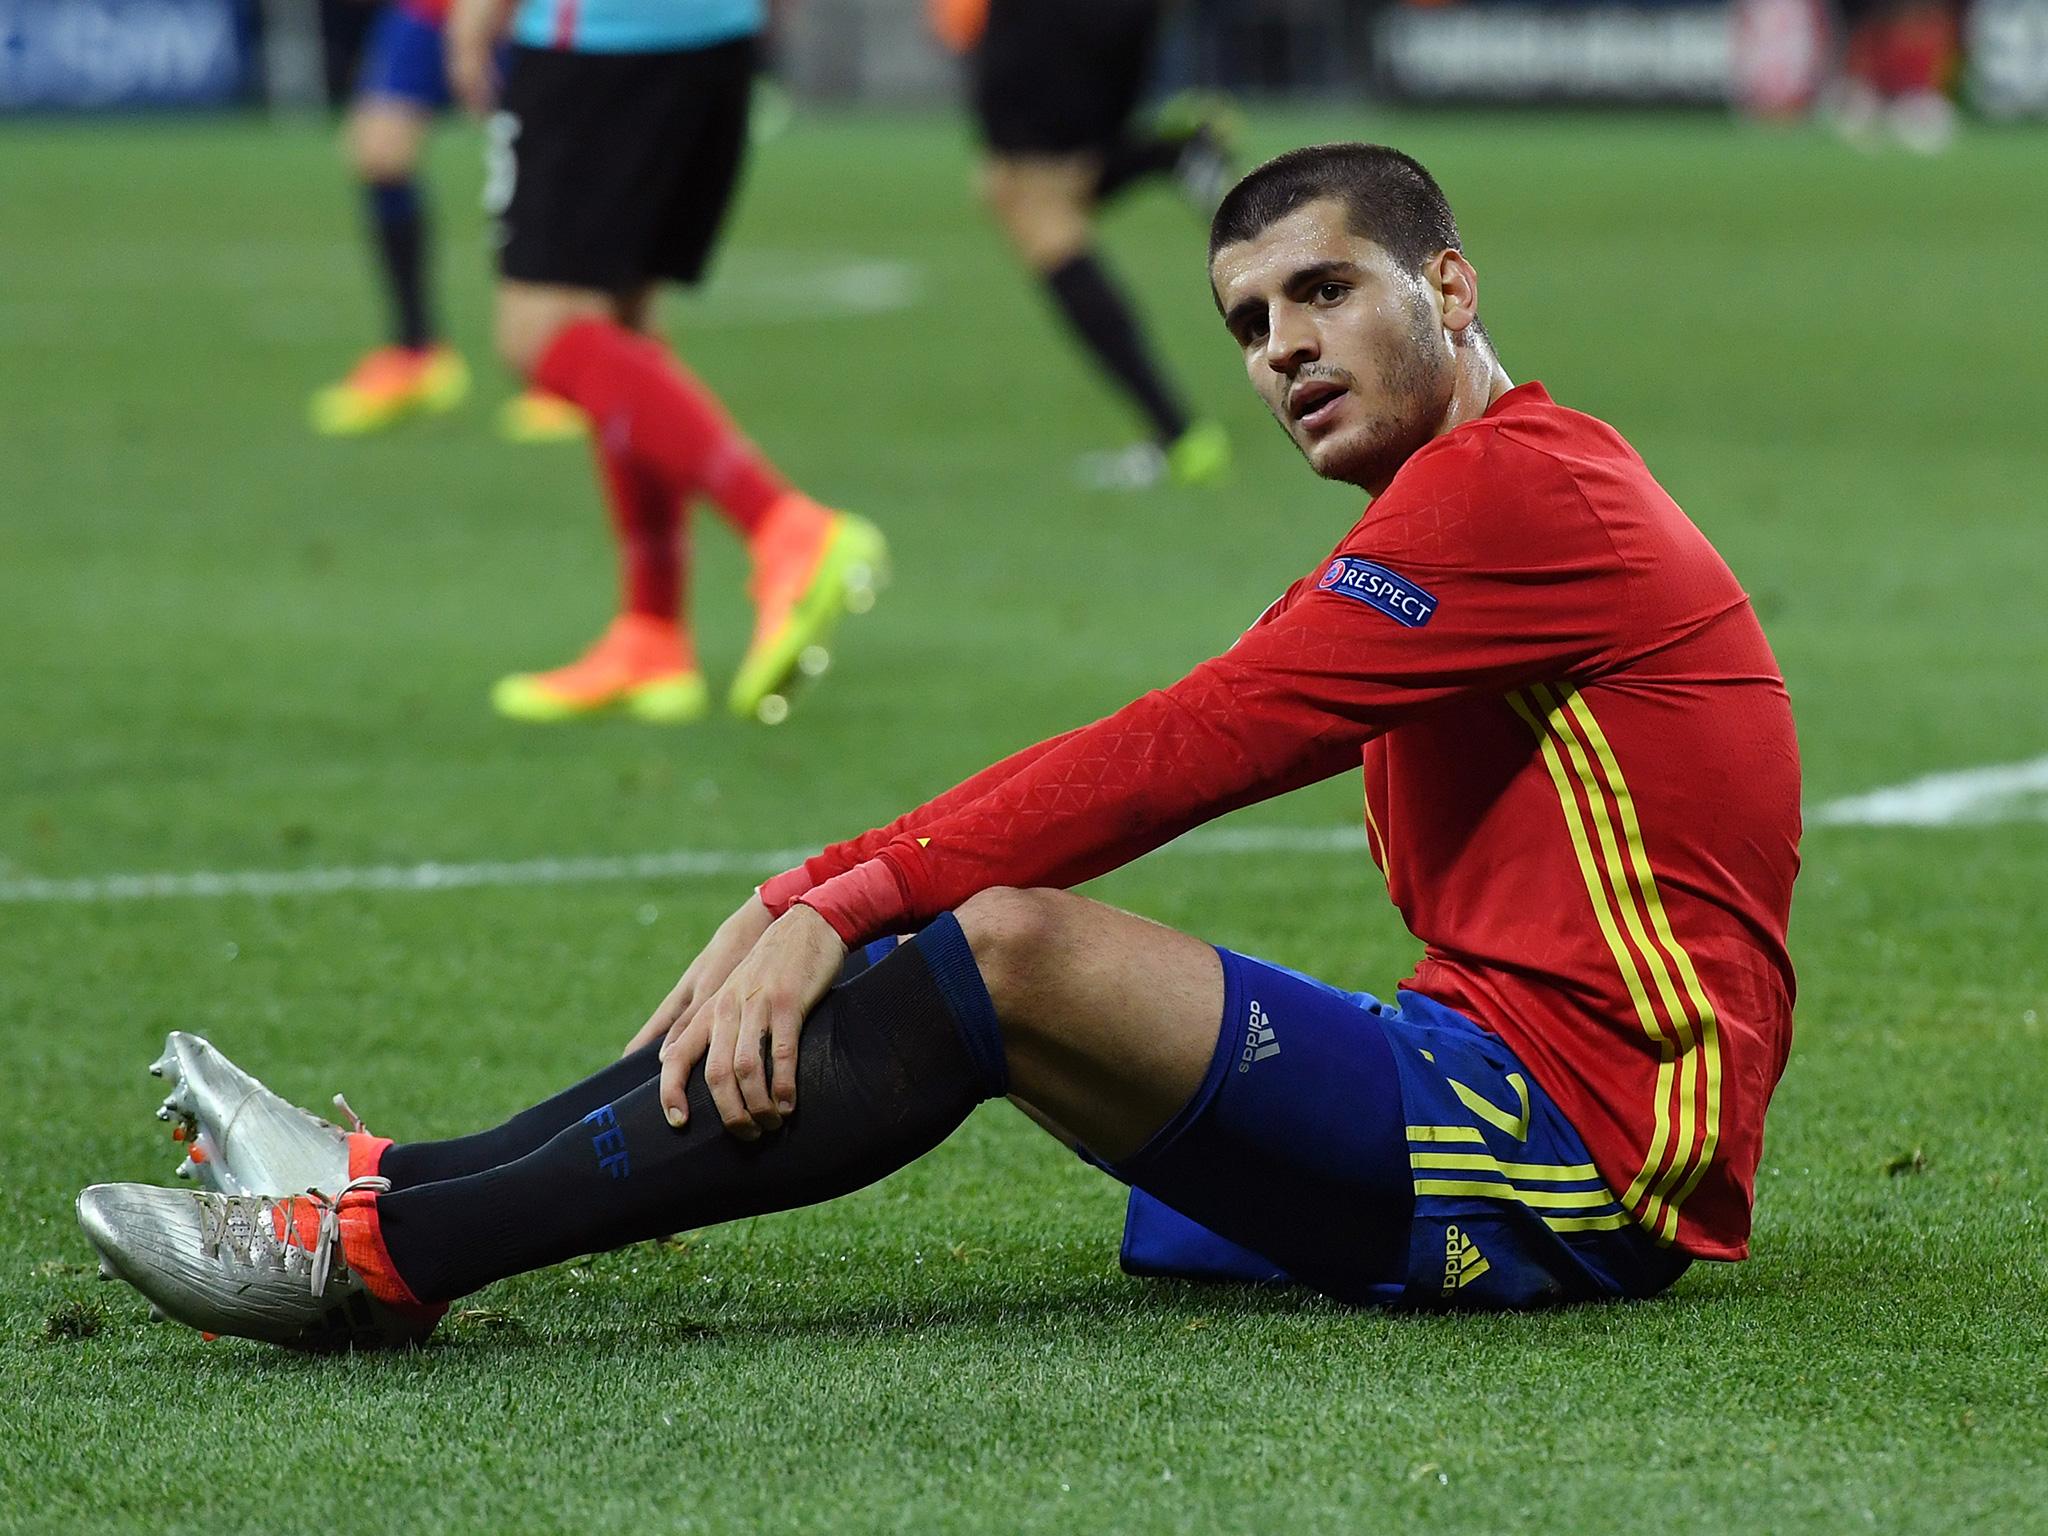 Morata has openly discussed returning to Real Madrid